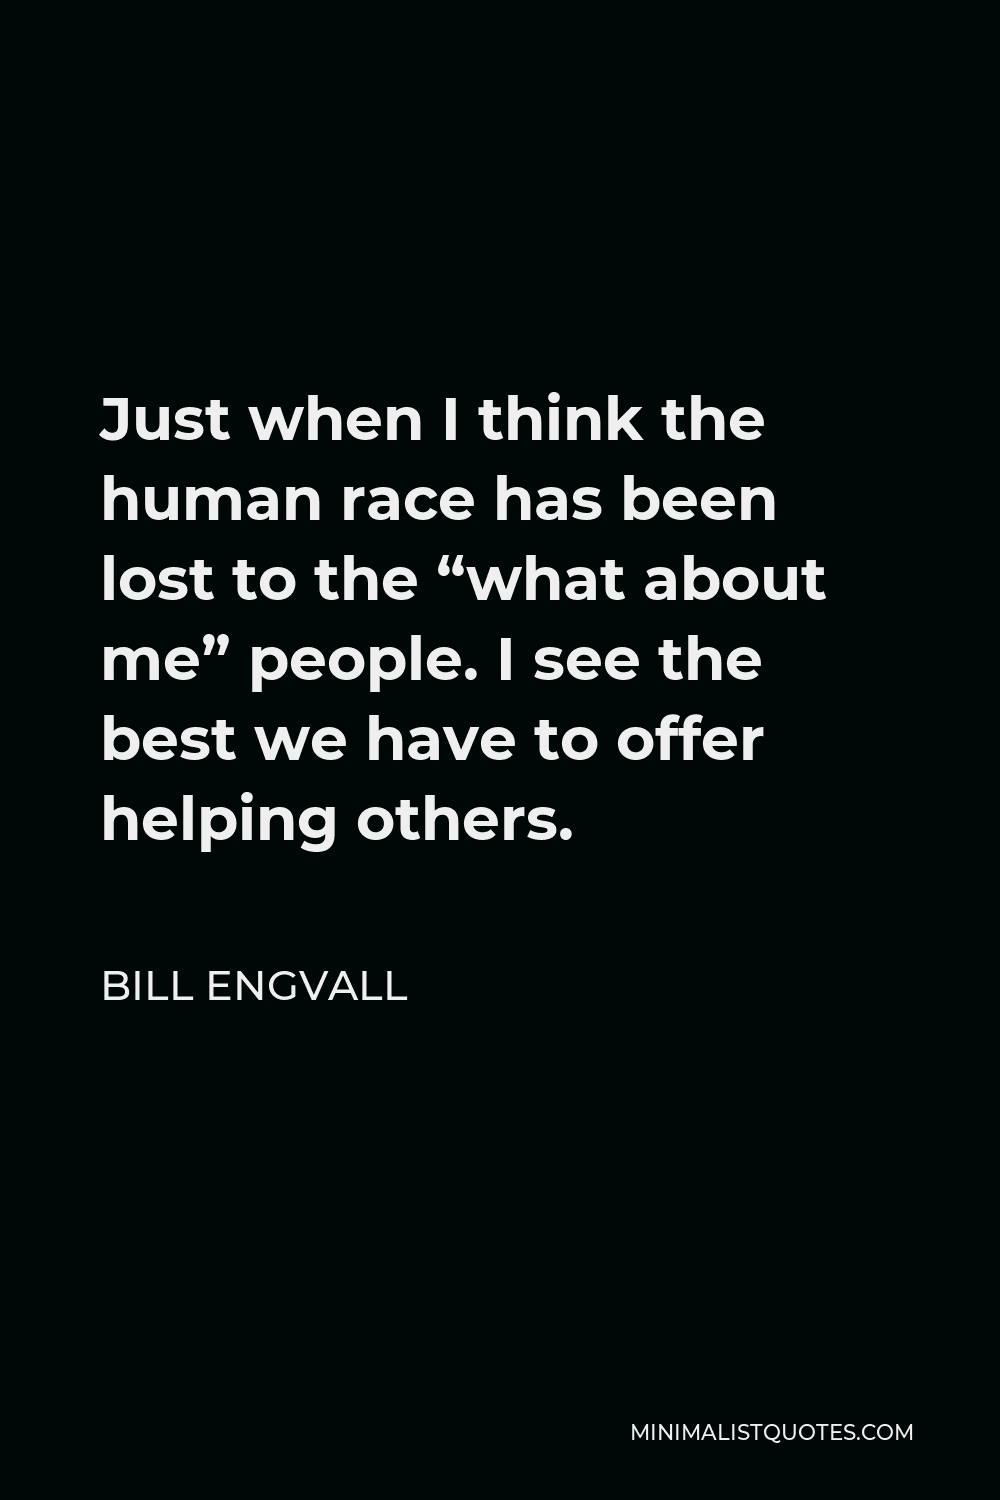 Bill Engvall Quote - Just when I think the human race has been lost to the “what about me” people. I see the best we have to offer helping others.